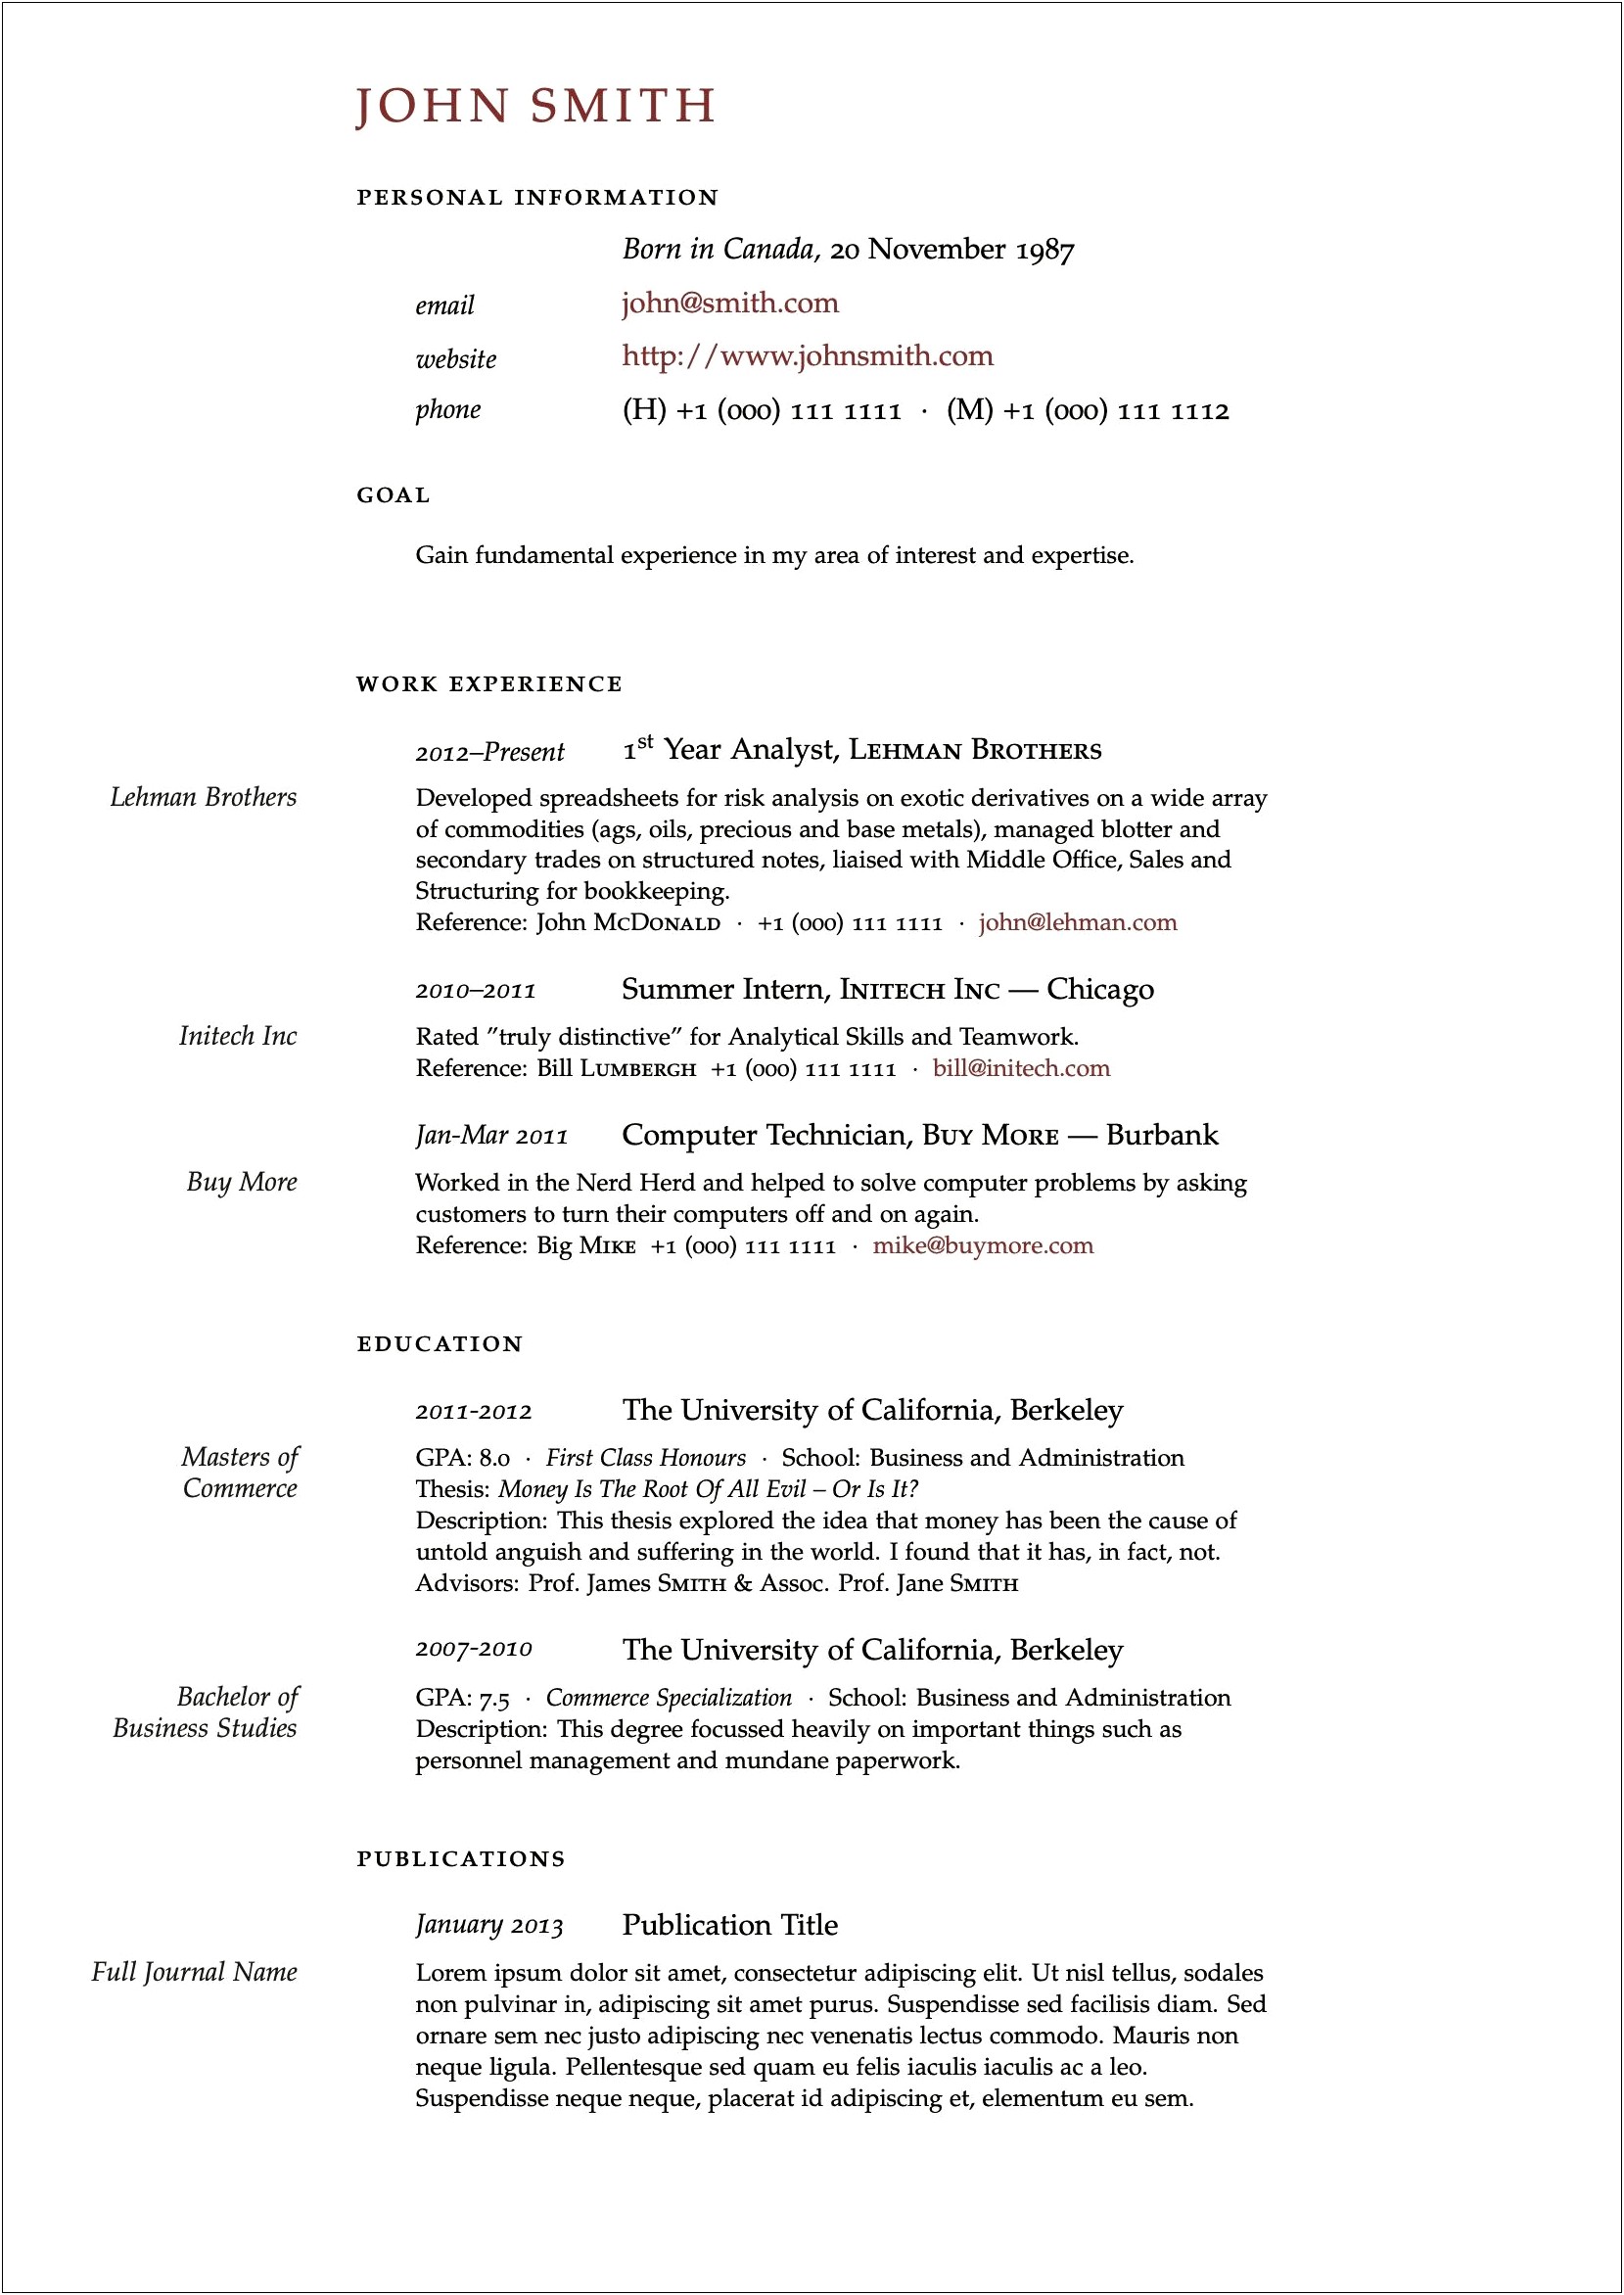 Sample Resume For First Year College Student